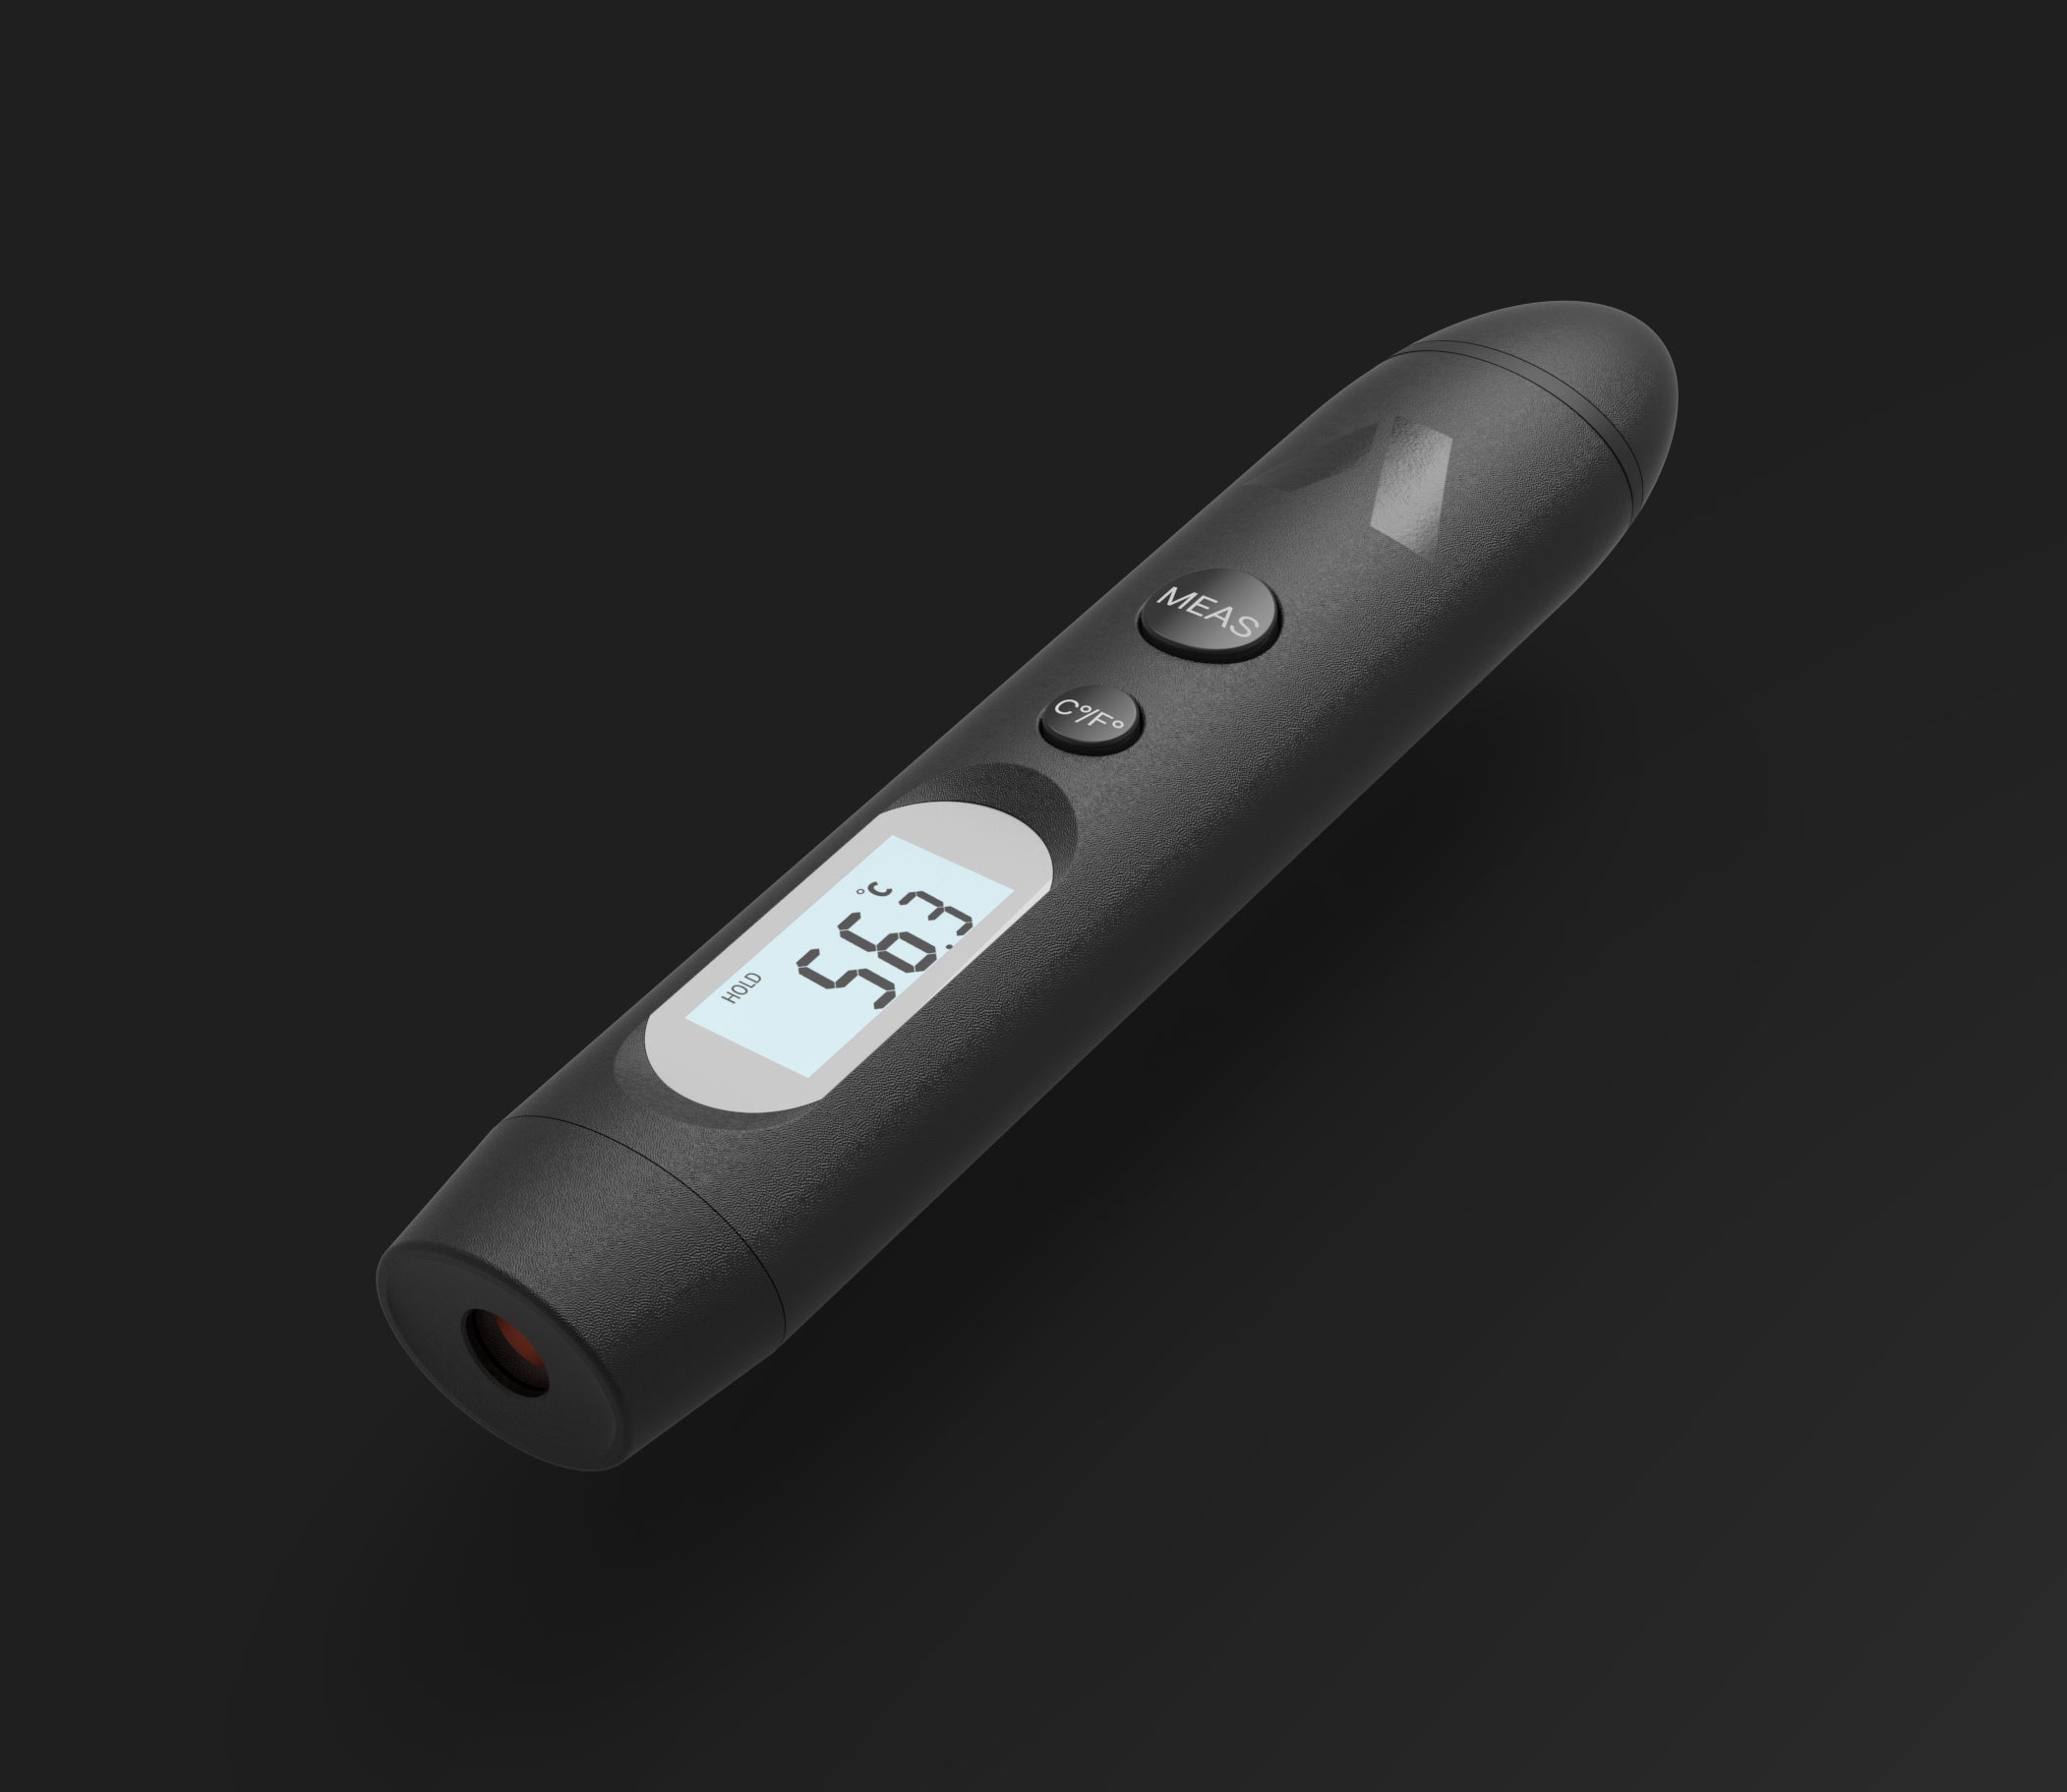 https://cdn.shopify.com/s/files/1/0256/7625/1239/products/Thermometer2.jpg?v=1658554842